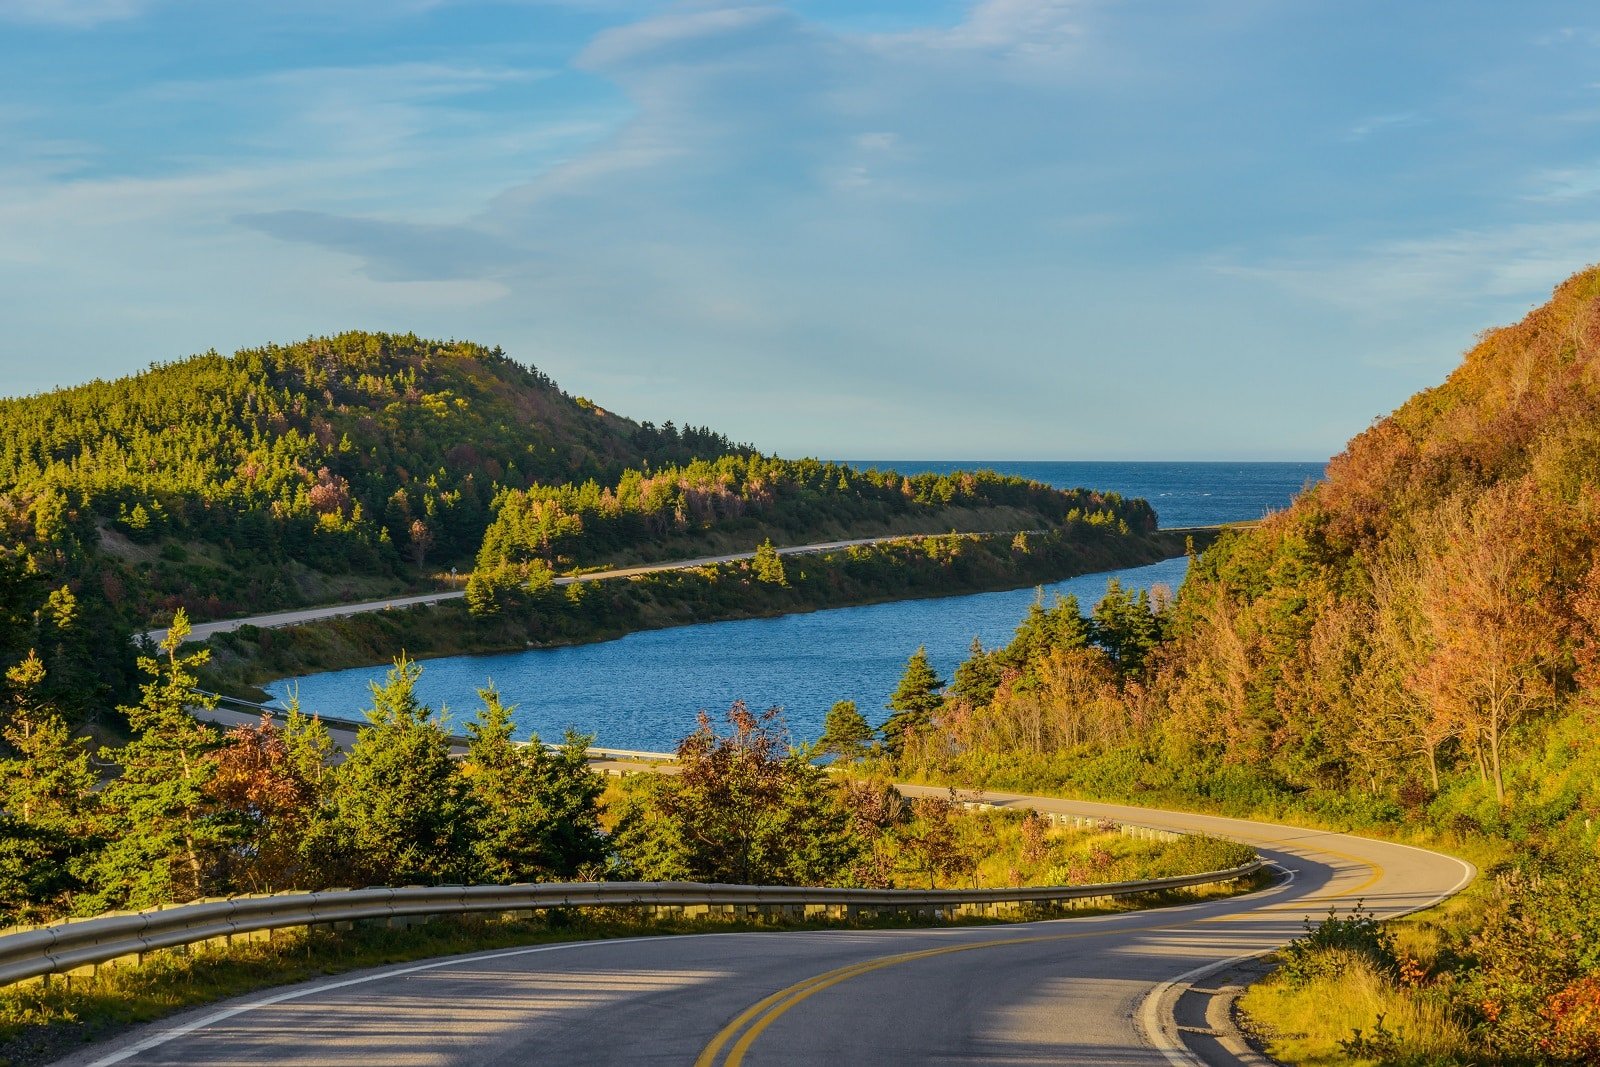 <p><span>The Cabot Trail in Nova Scotia is a 300-kilometer loop around Cape Breton Island. It offers ocean views, forested landscapes, and cultural experiences, reflecting the region’s Celtic and Acadian heritage. The route passes through fishing villages and historic sites, showcasing Nova Scotia’s natural and cultural beauty.</span></p> <p><b>Insider’s Tip: </b><span>Enjoy the local seafood and take part in the Celtic culture of the region. </span></p> <p><b>When to Travel: </b><span>June to October for the best weather and fall foliage.</span></p> <p><b>How to Get There: </b><span>Start and end in Baddeck, Nova Scotia, completing the circular route.</span></p>